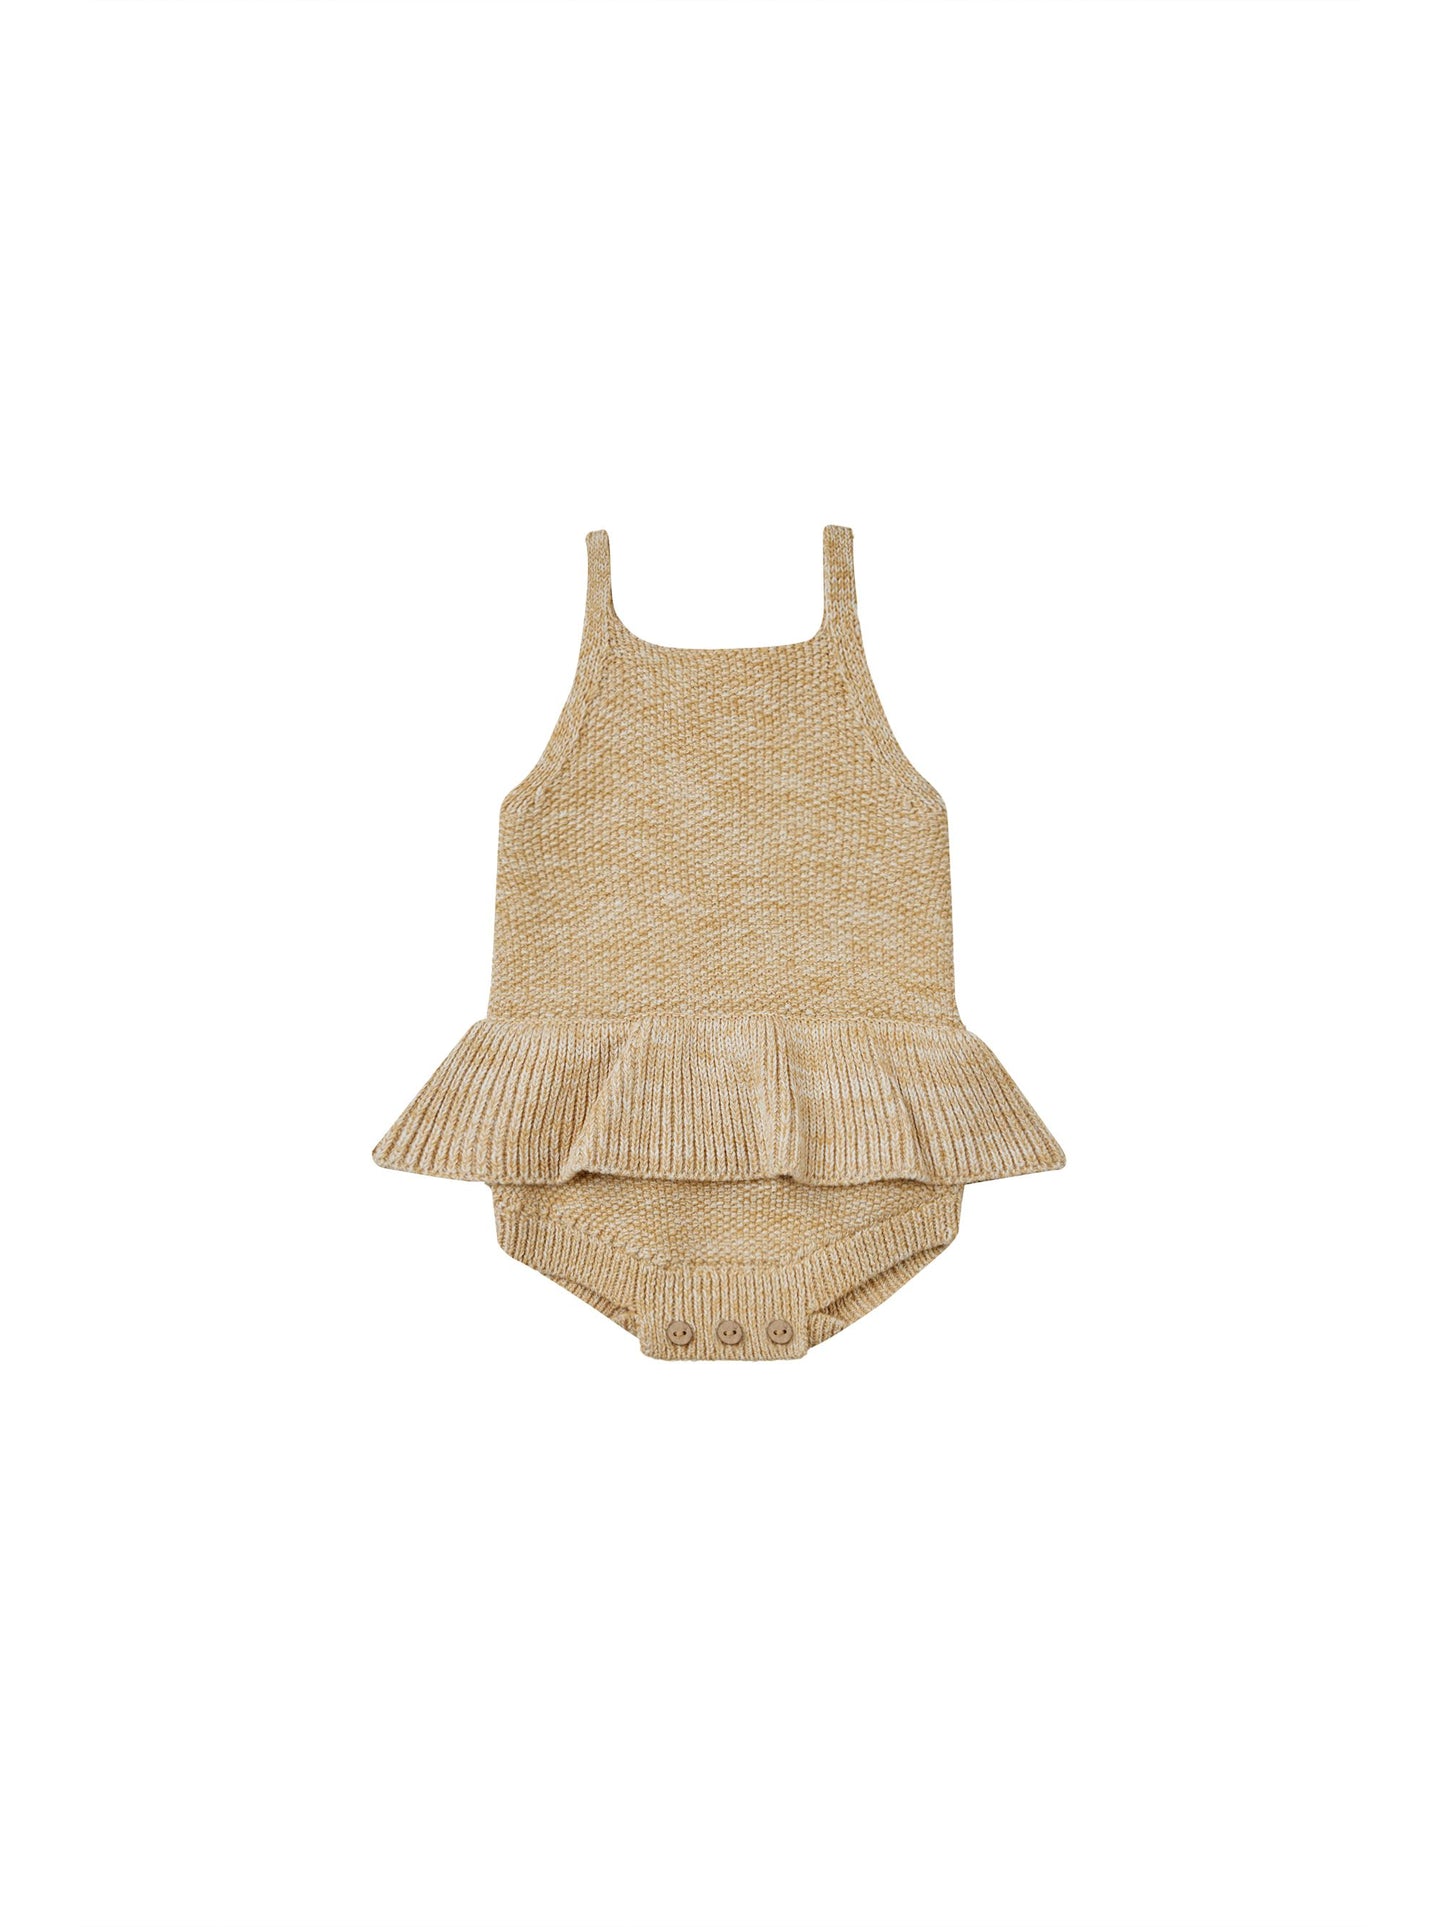 Quincy Mae Knit Ruffle Romper in Heathered Honey